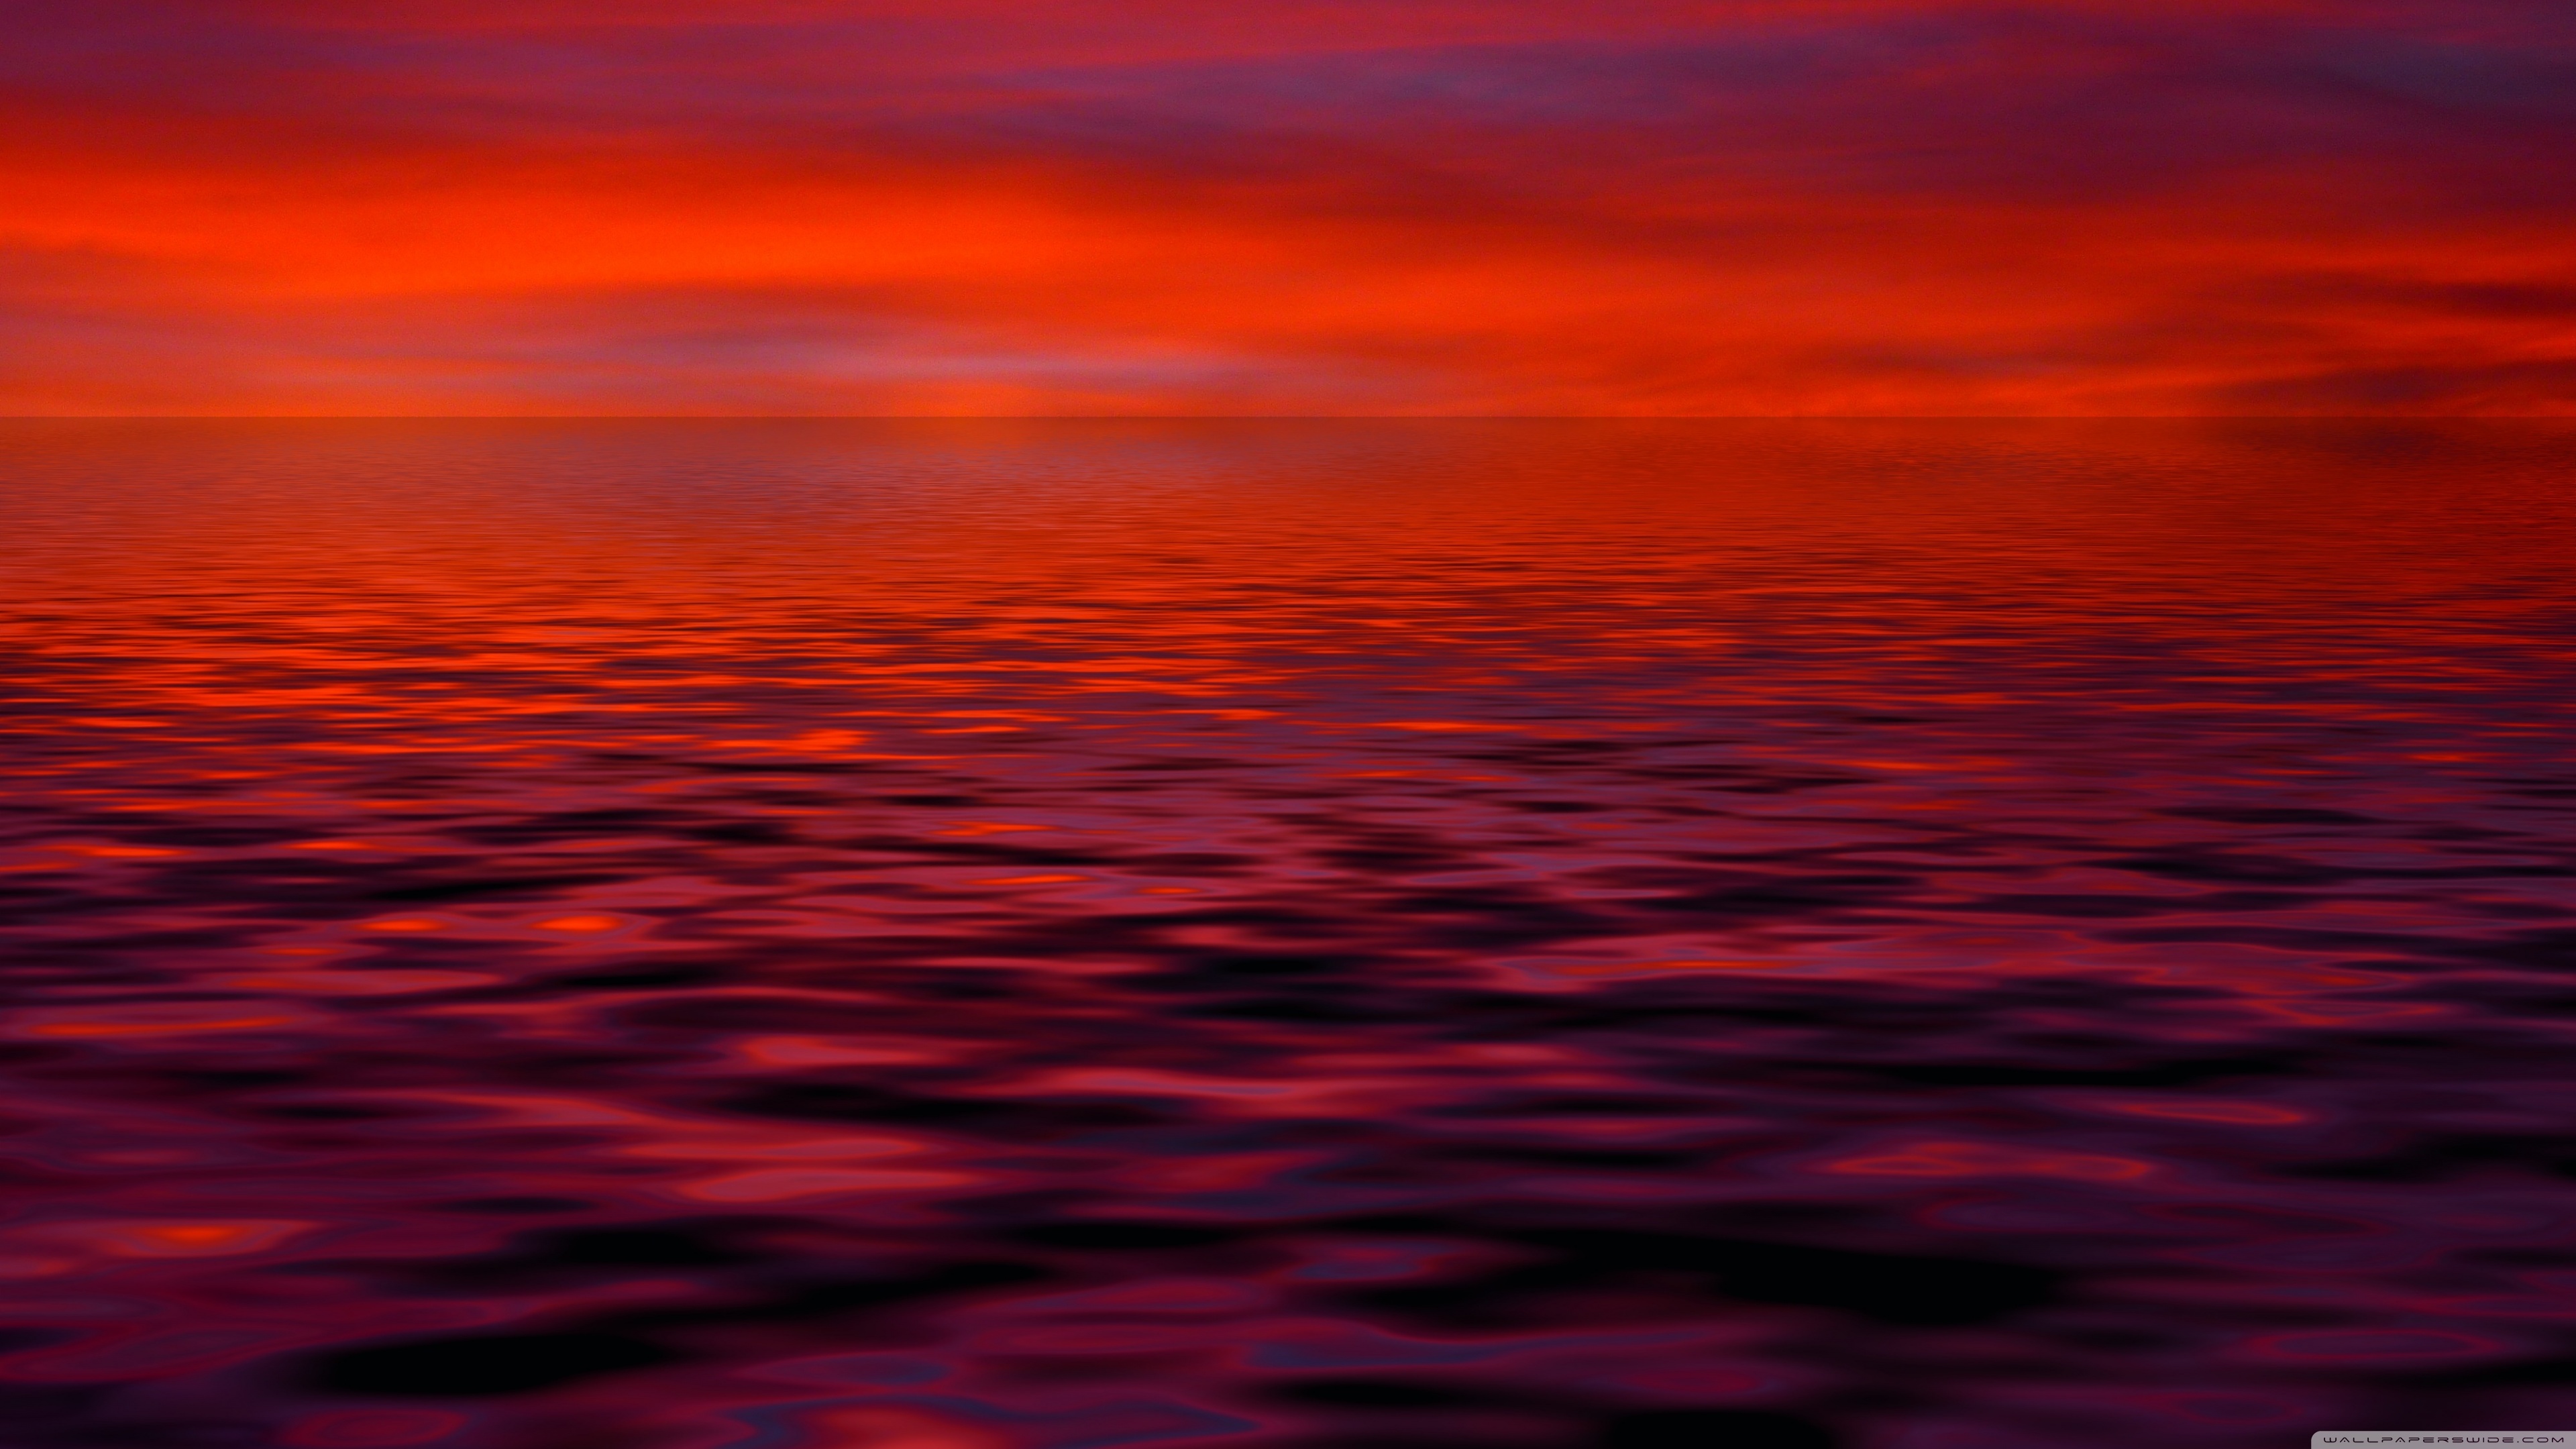 most popular wallpaper in the world,sky,horizon,red sky at morning,afterglow,red